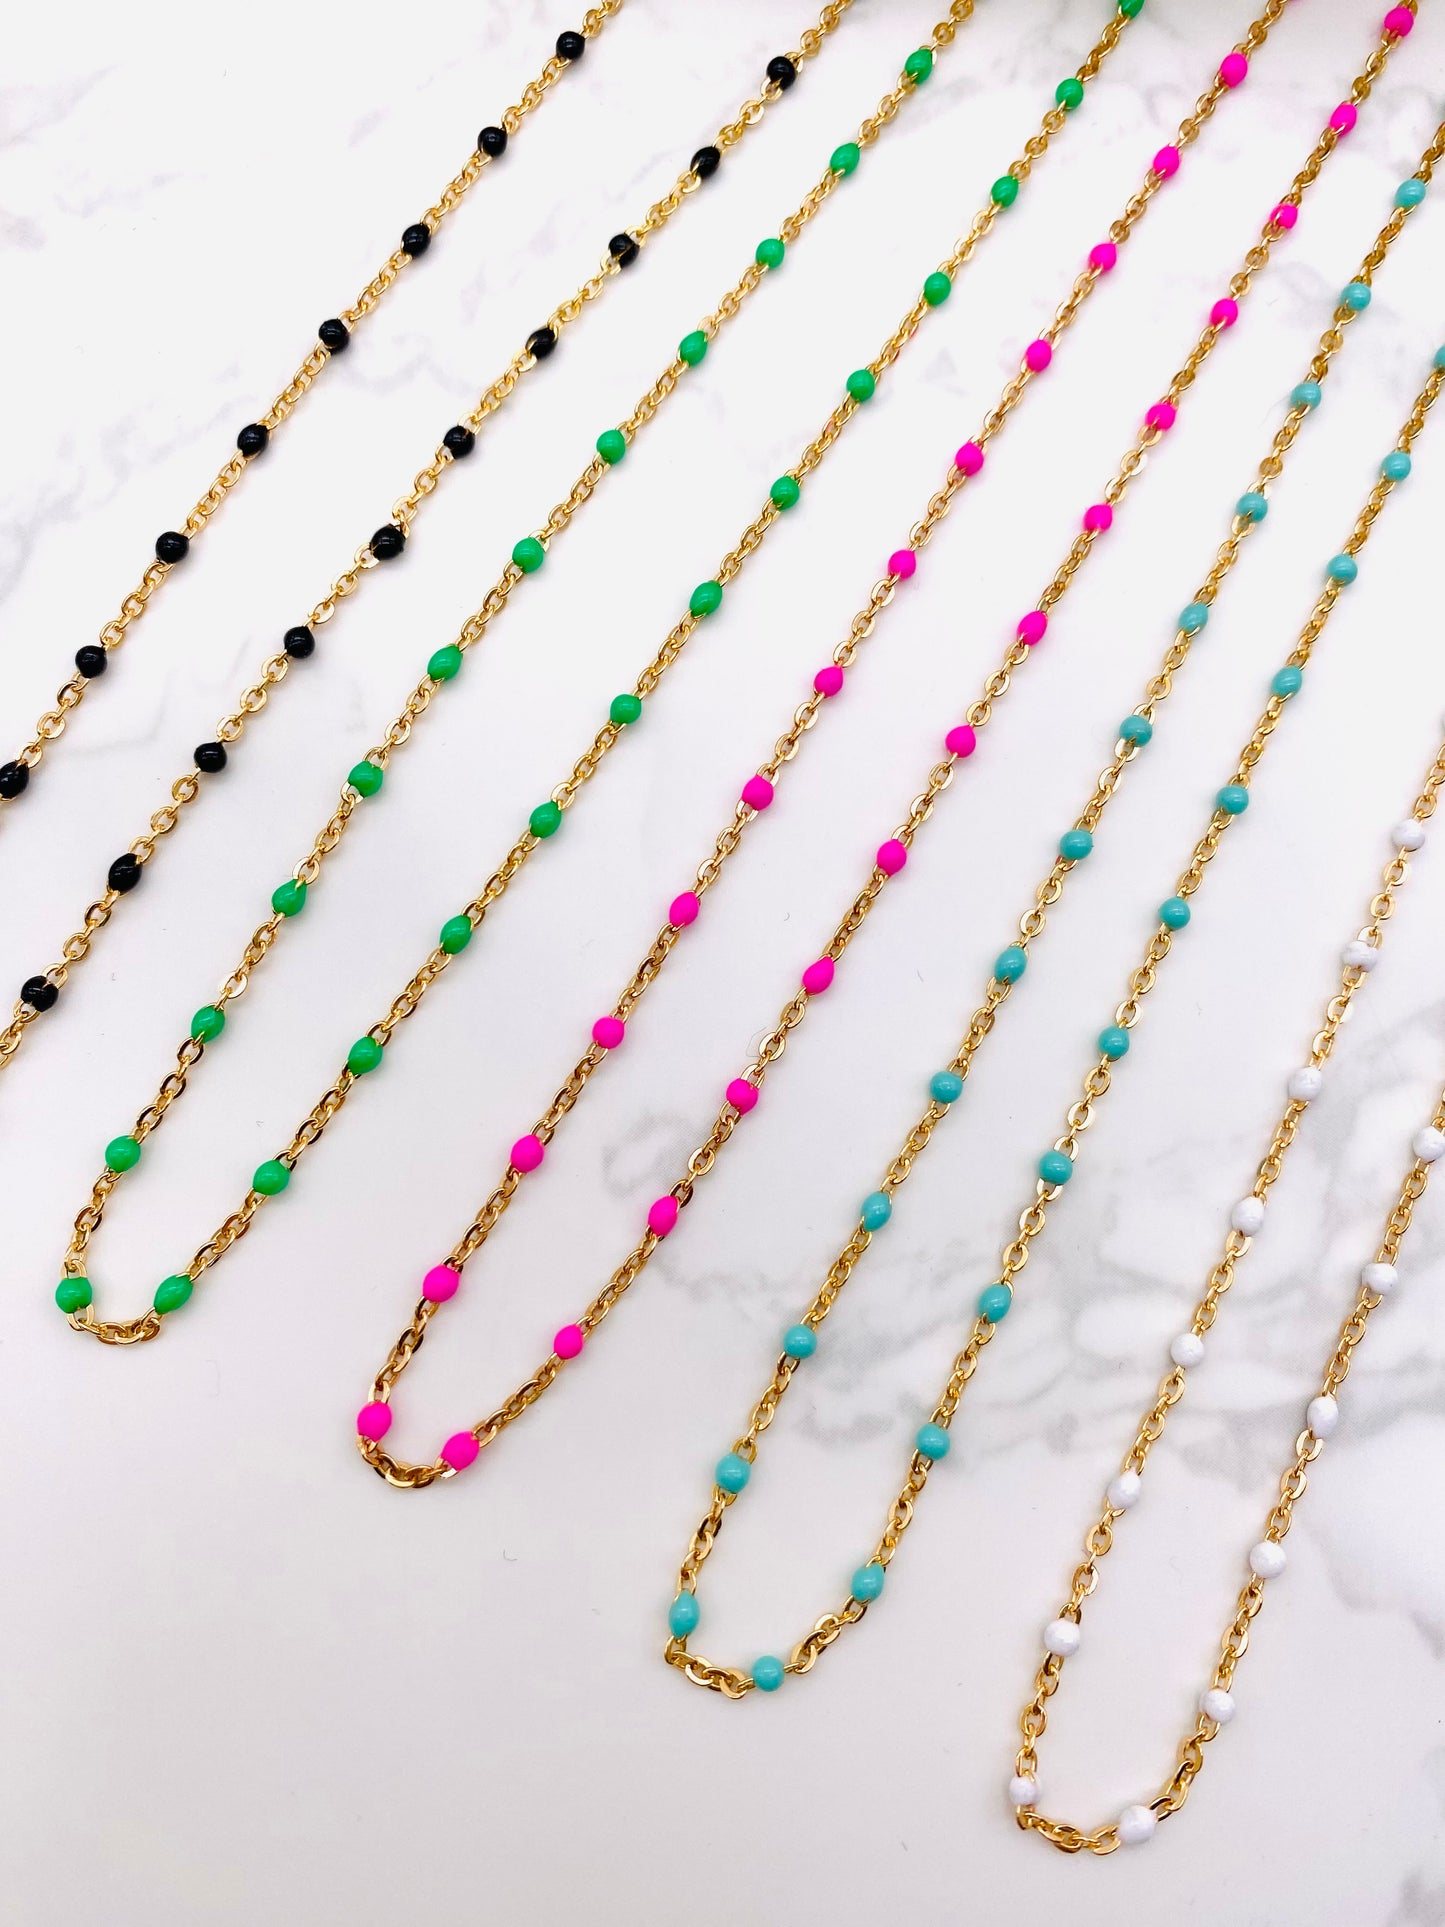 Color Enamel Cable Chain Necklaces - Gold Filled